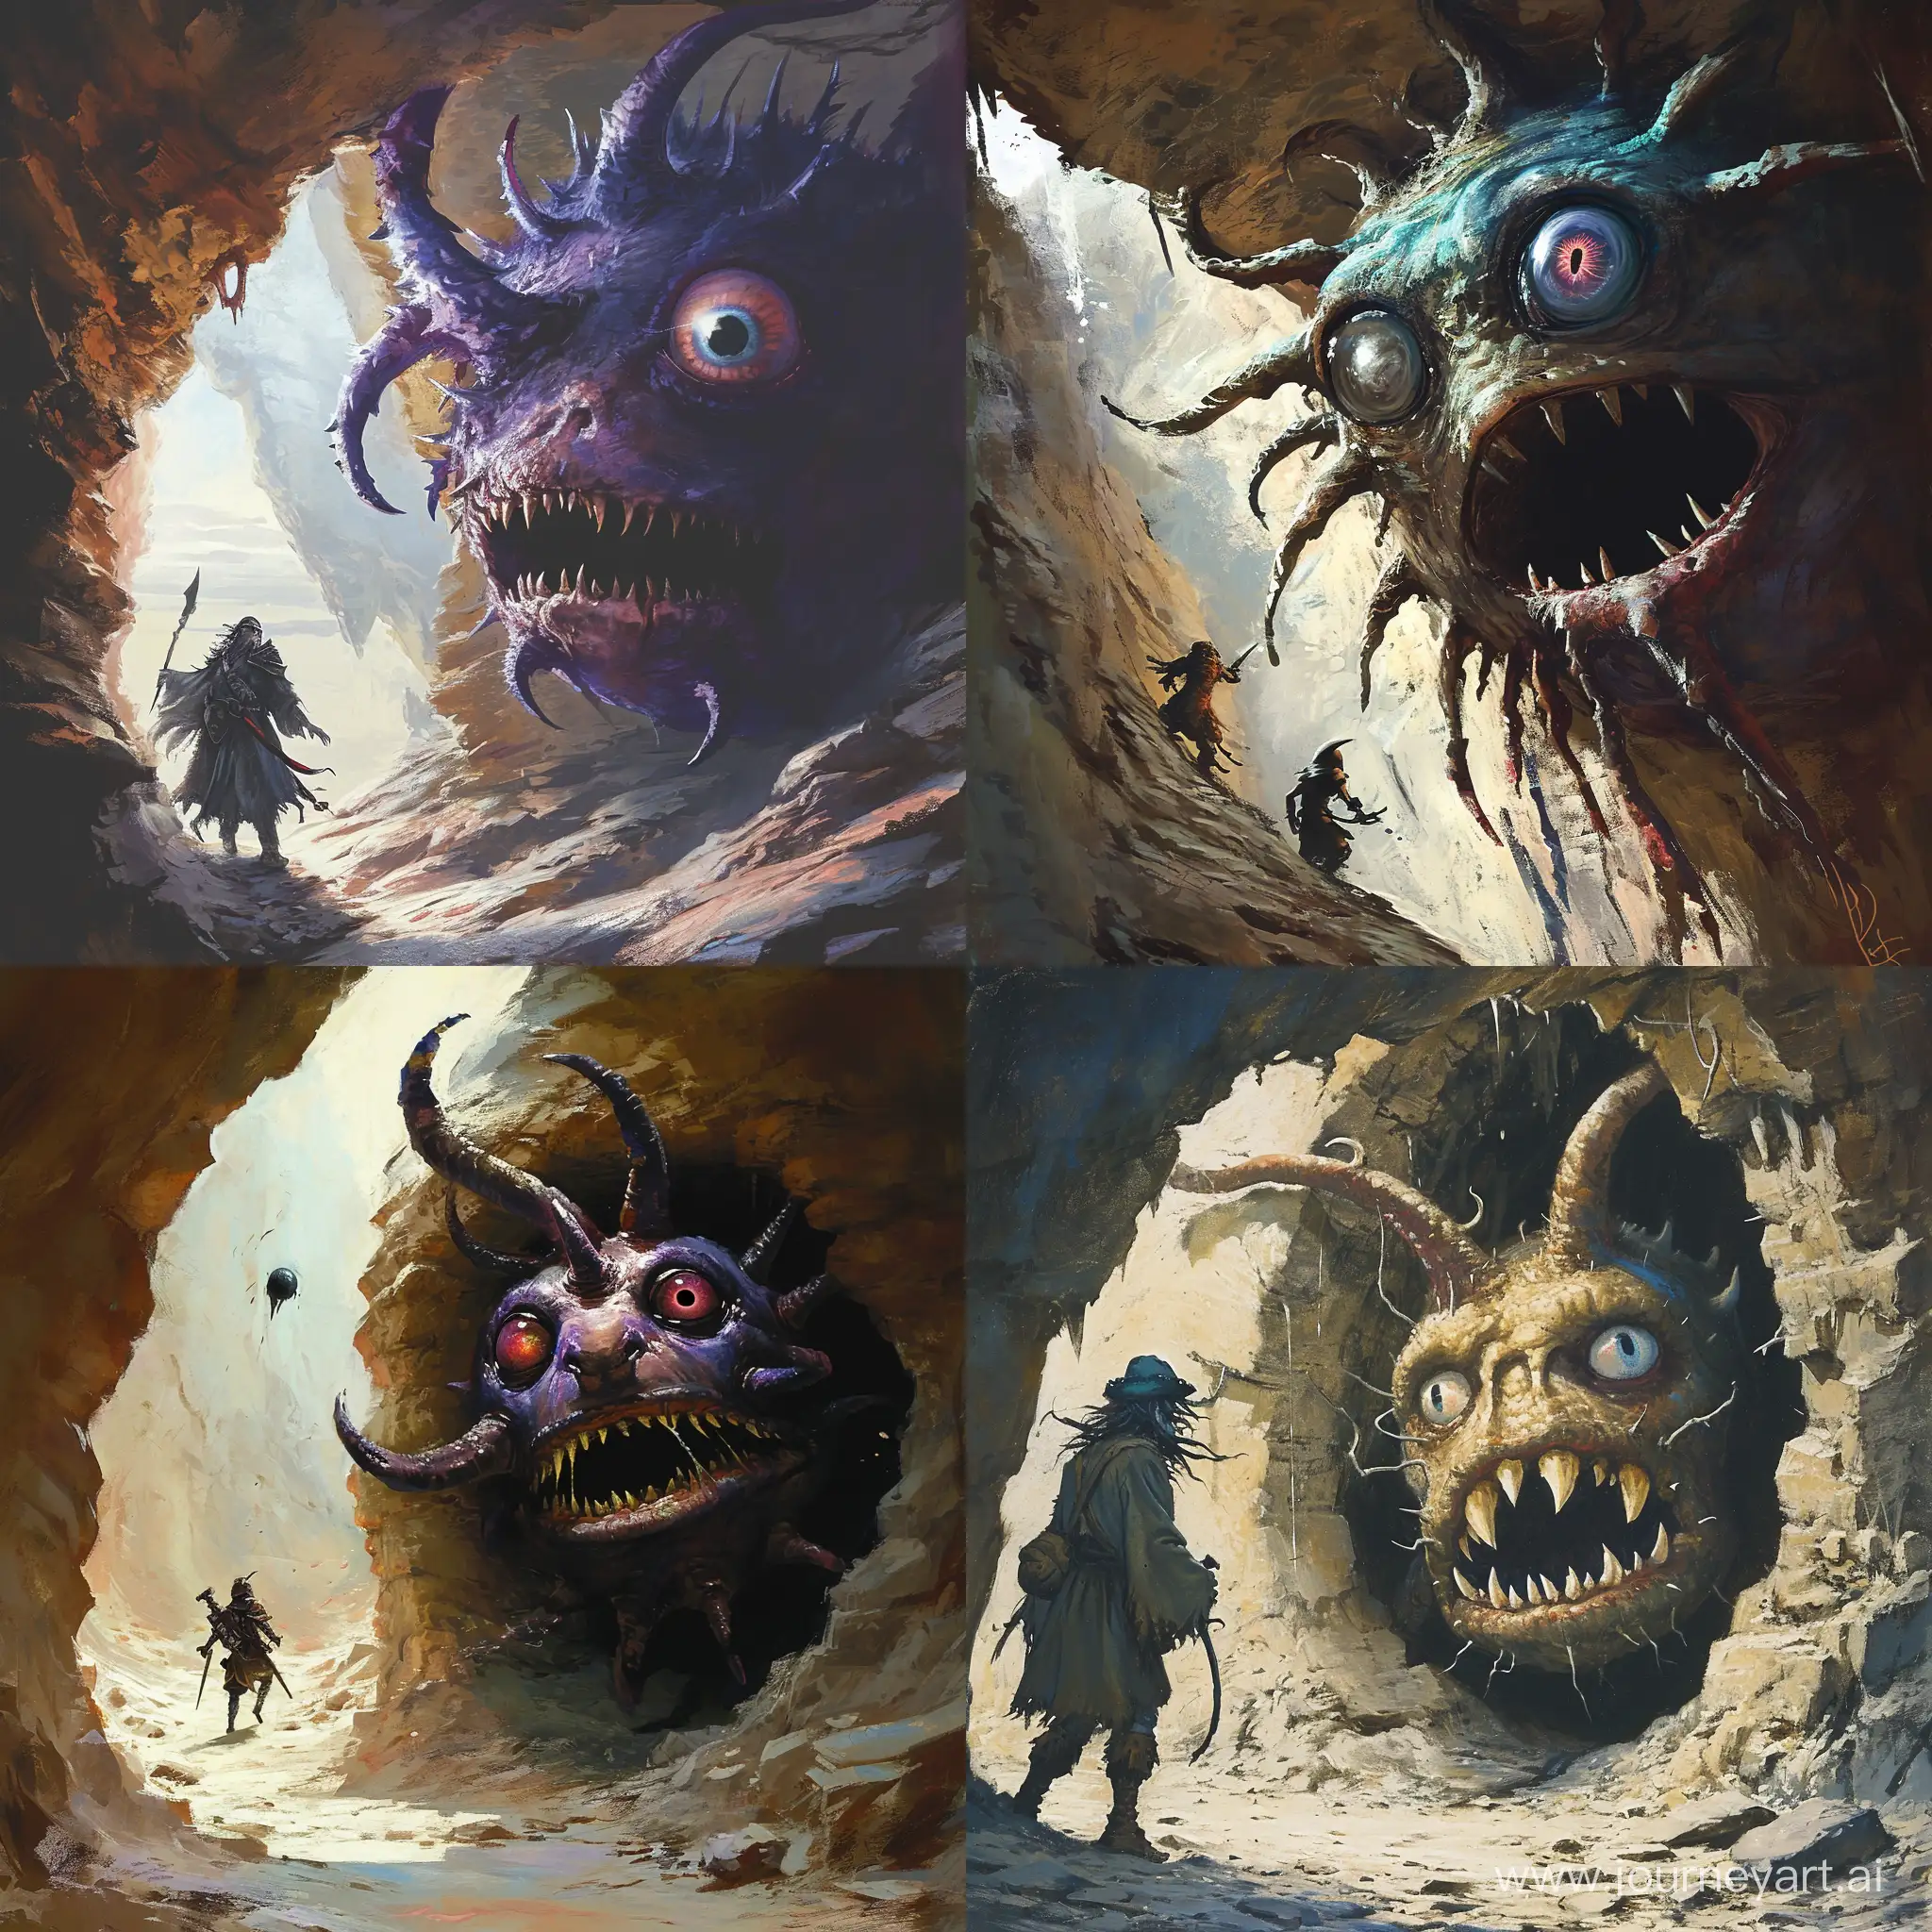 A dnd beholder looking at a lone adventurer through a cave wall.